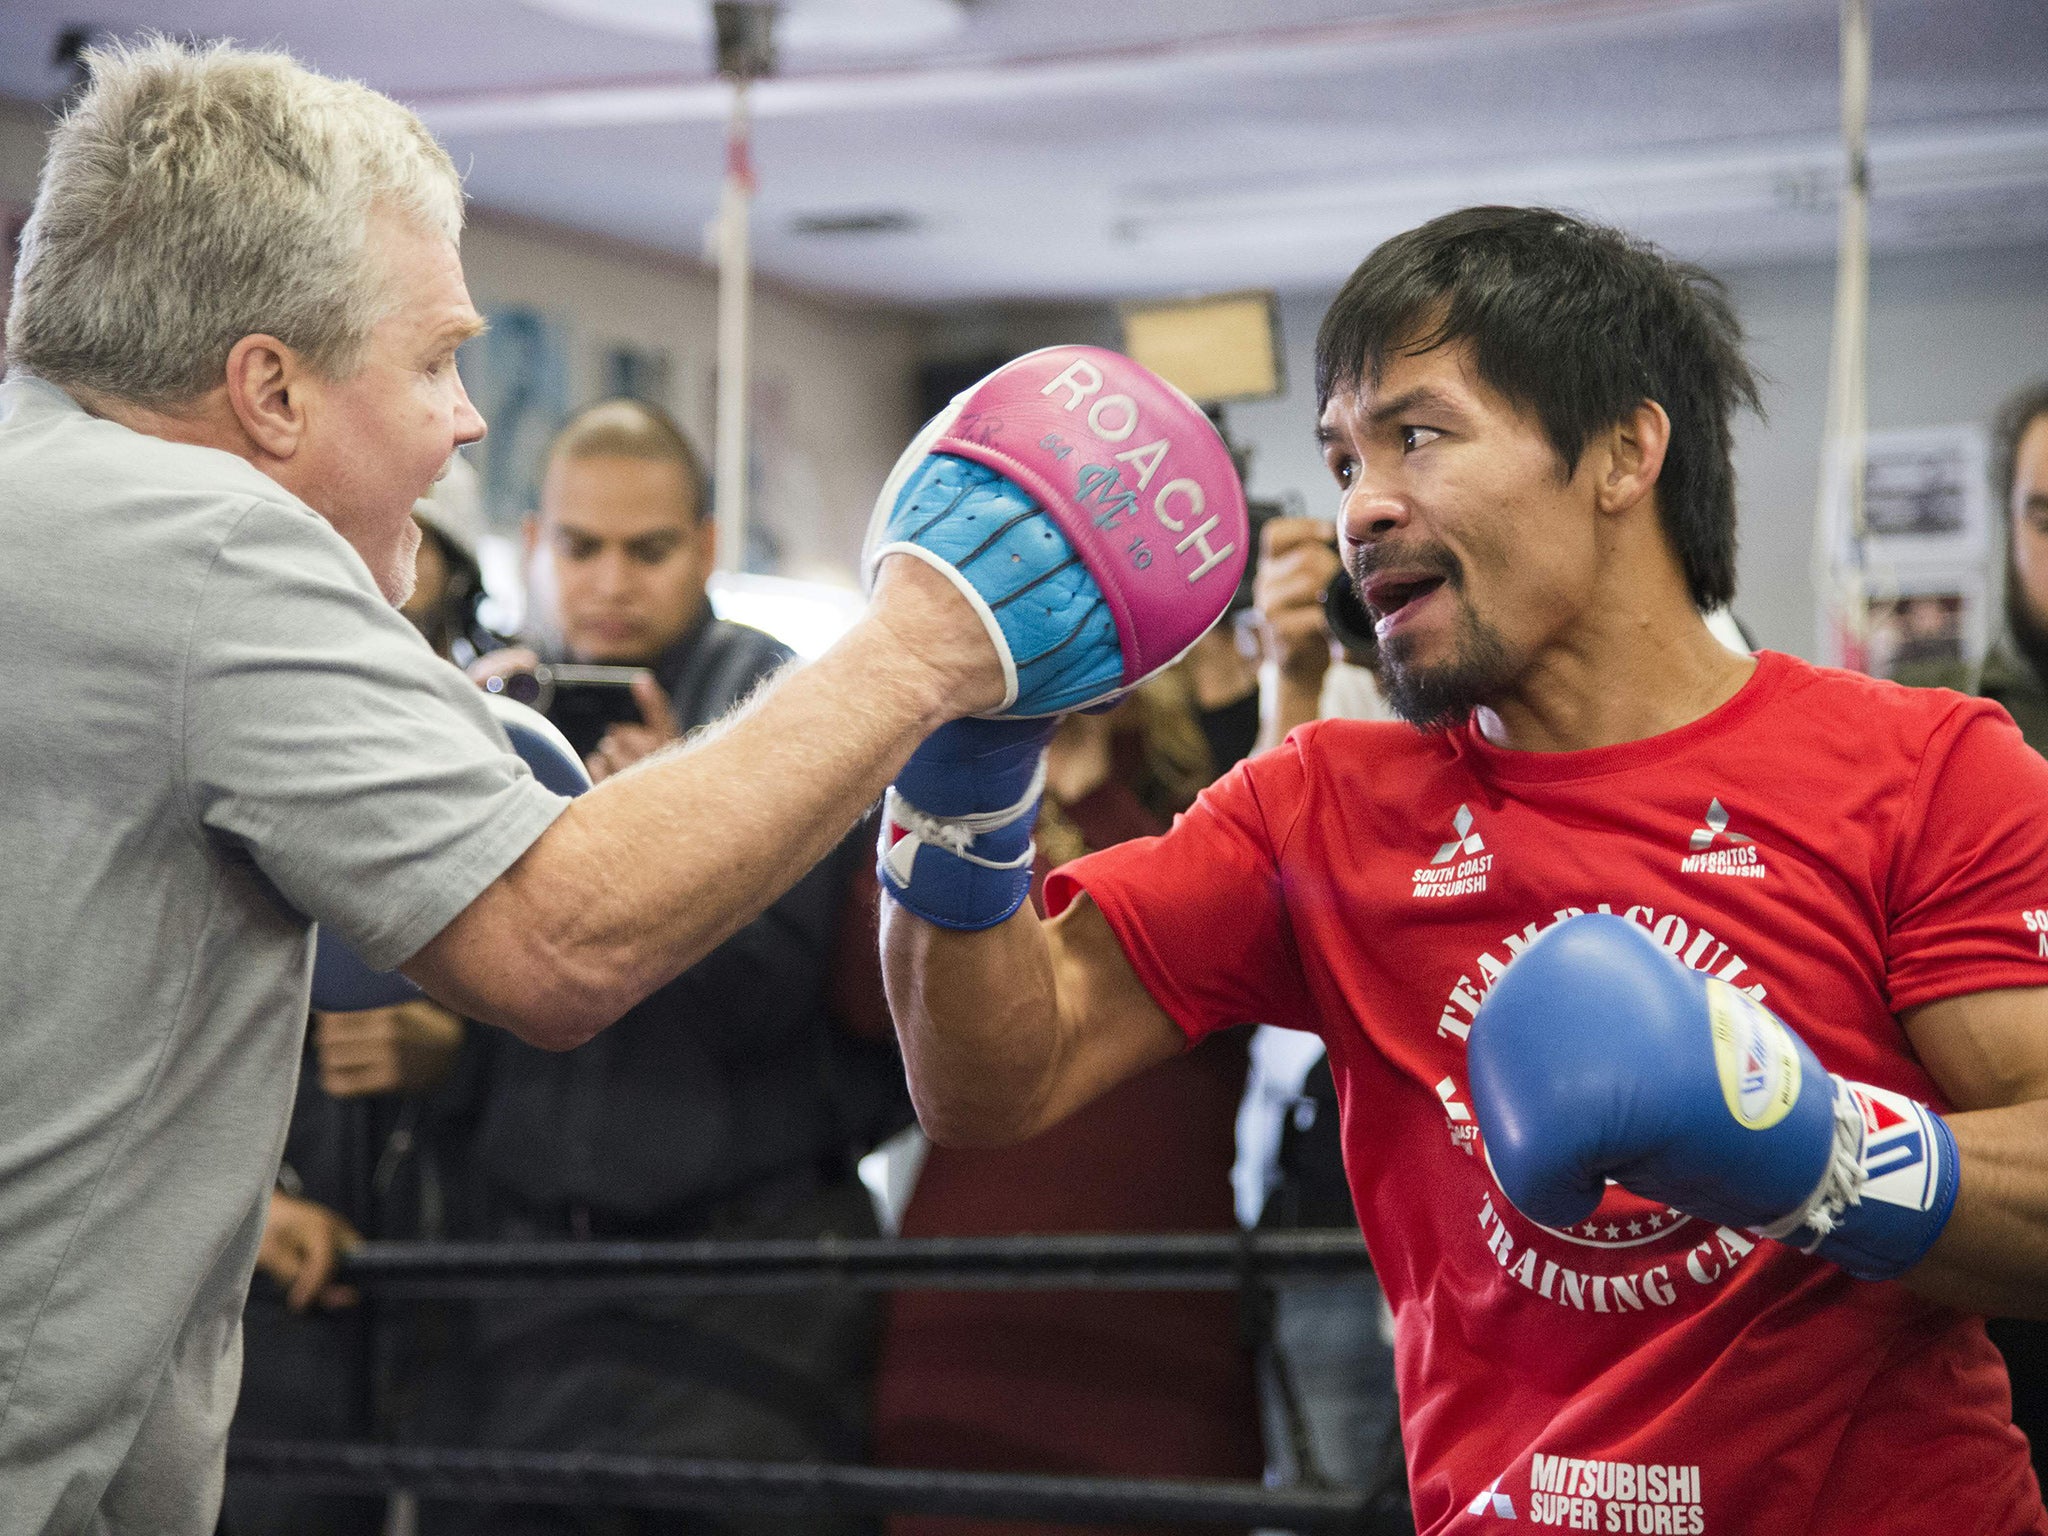 Freddie Roach trains Manny Pacquiao at his Wild Card gym